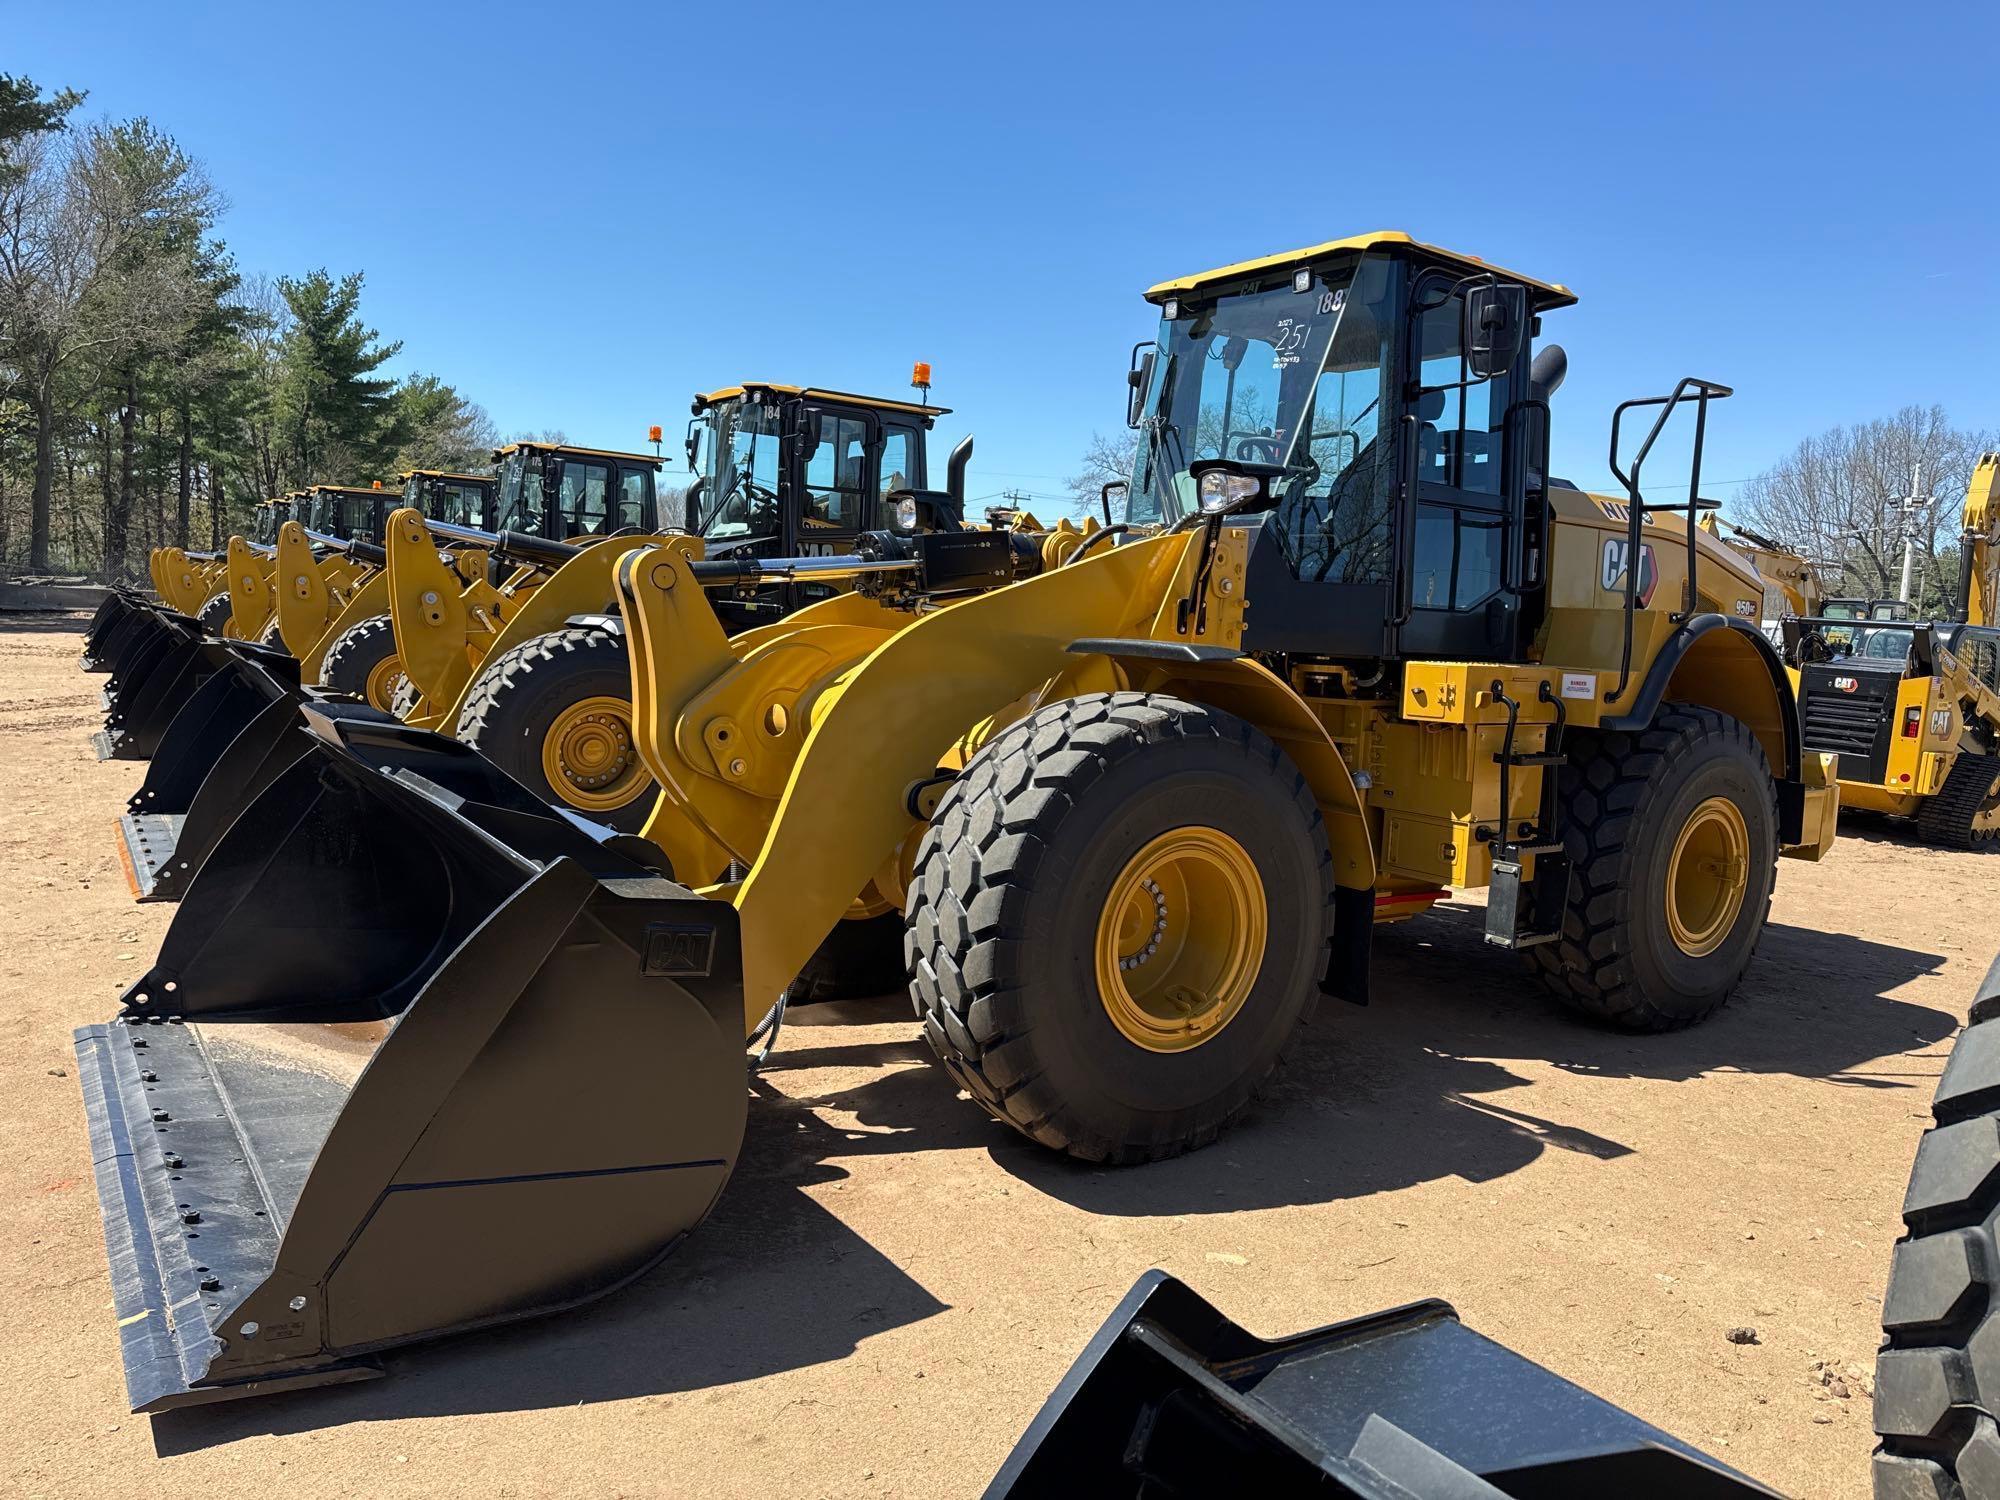 2023 CAT 950GC RUBBER TIRED LOADER... SN-06433 powered by Cat C7.1 diesel engine, 225hp, equipped wi